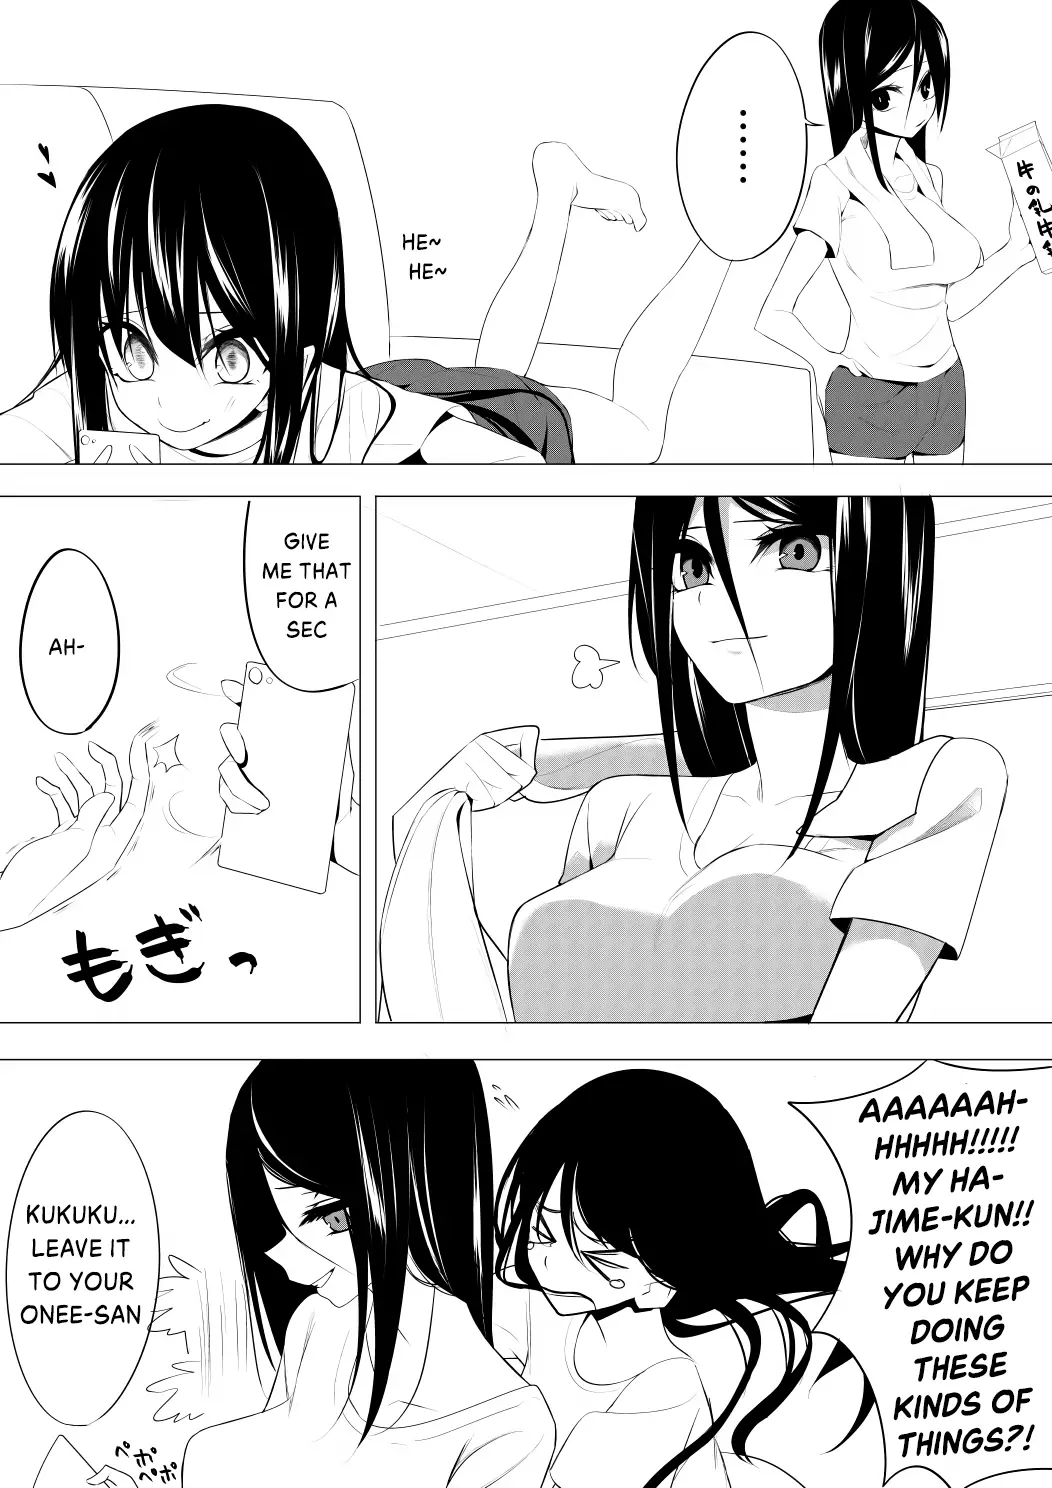 Mitsuishi-San Is Being Weird This Year - 8 page 6-5c70c9ce